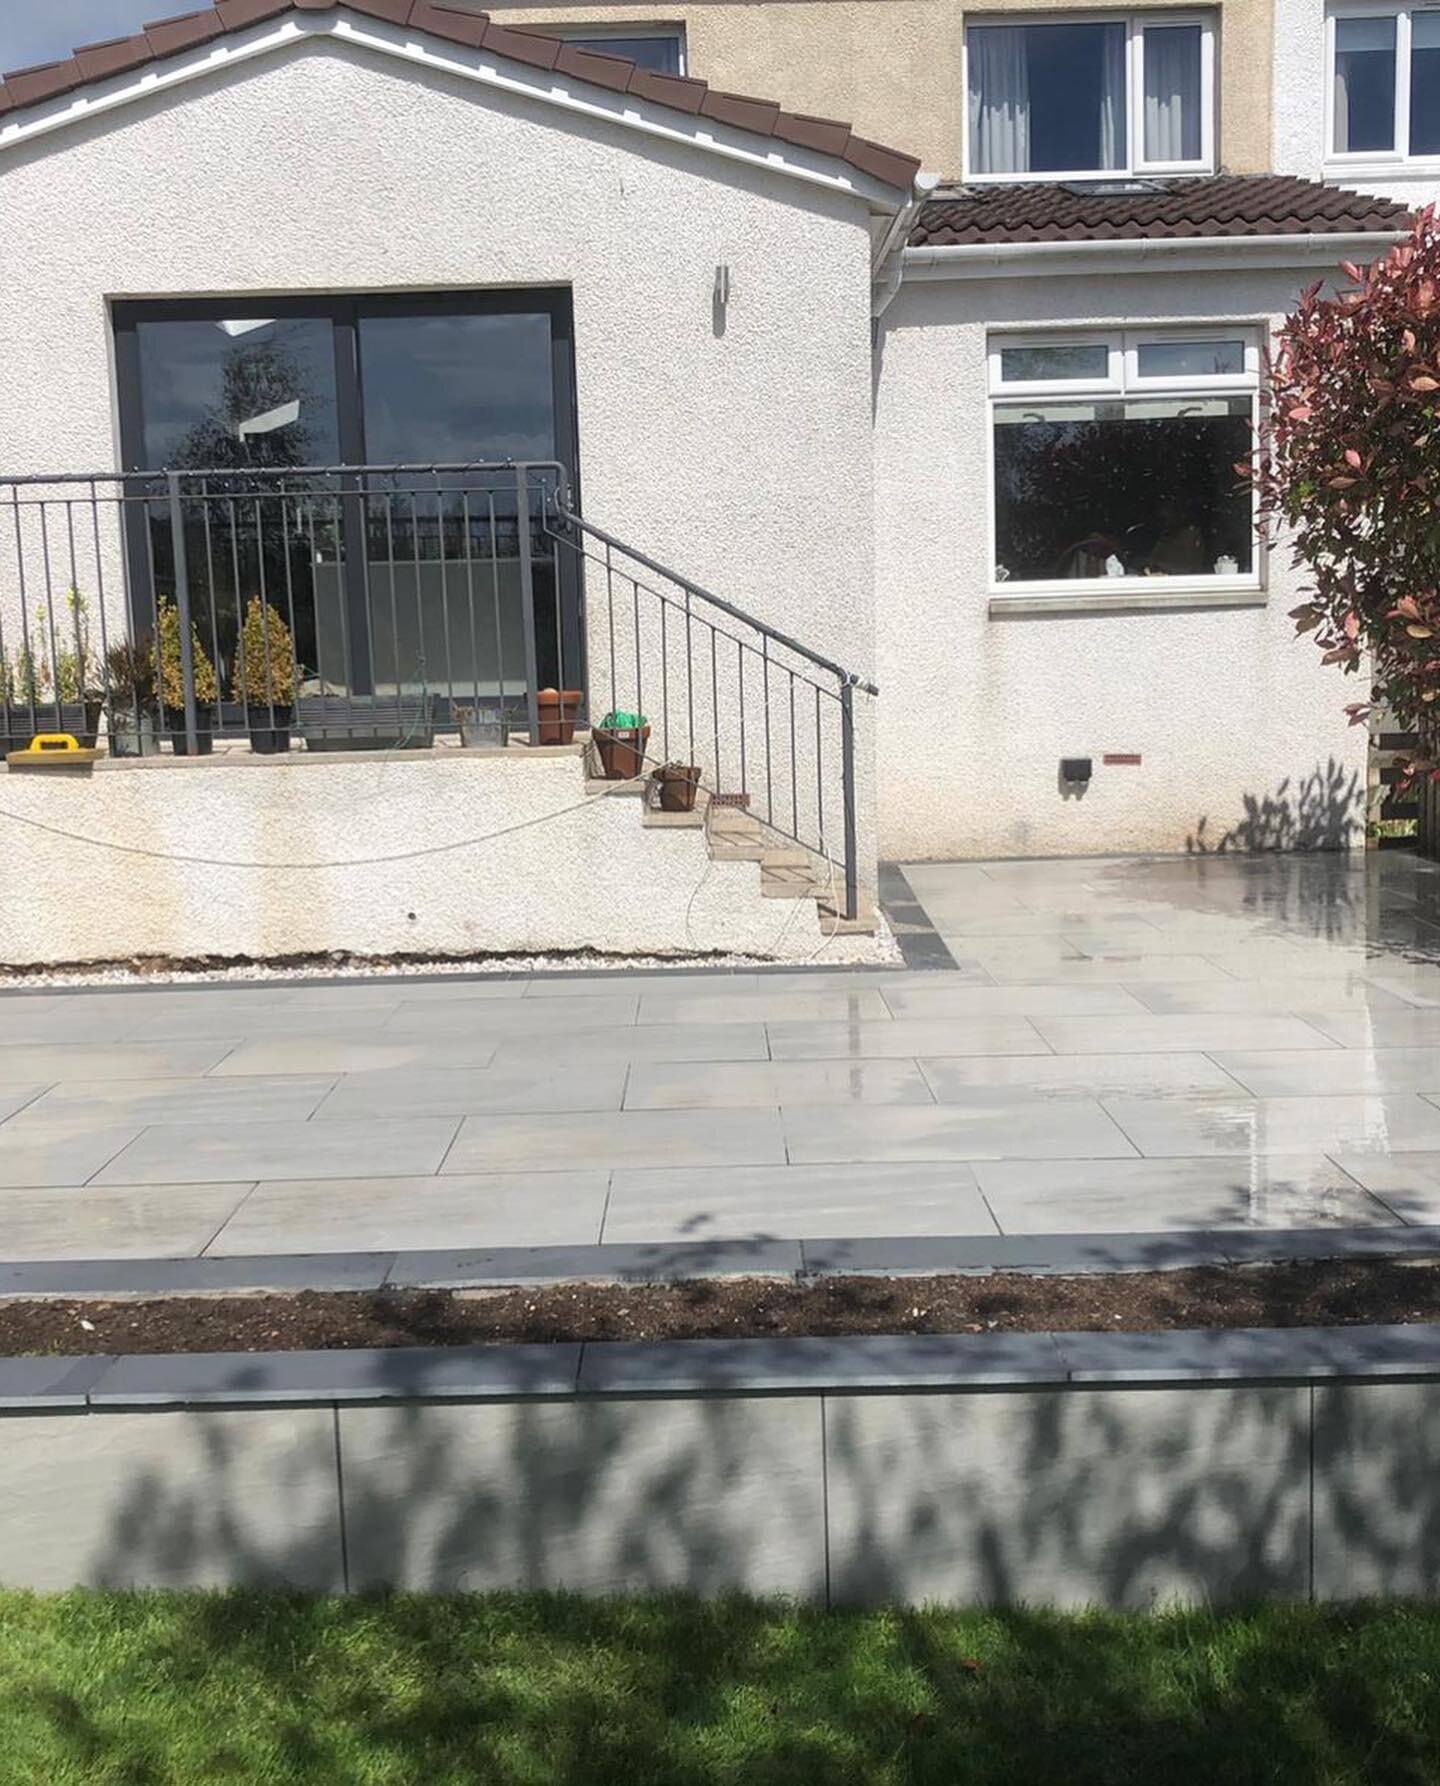 One of our recent jobs in Bridge of Weir where we completely renewed the drive way and built a raised Kandla Grey patio with black Brazilian slate borders. We also built new baton fences either side of the garden in-keeping with the rest of the proje